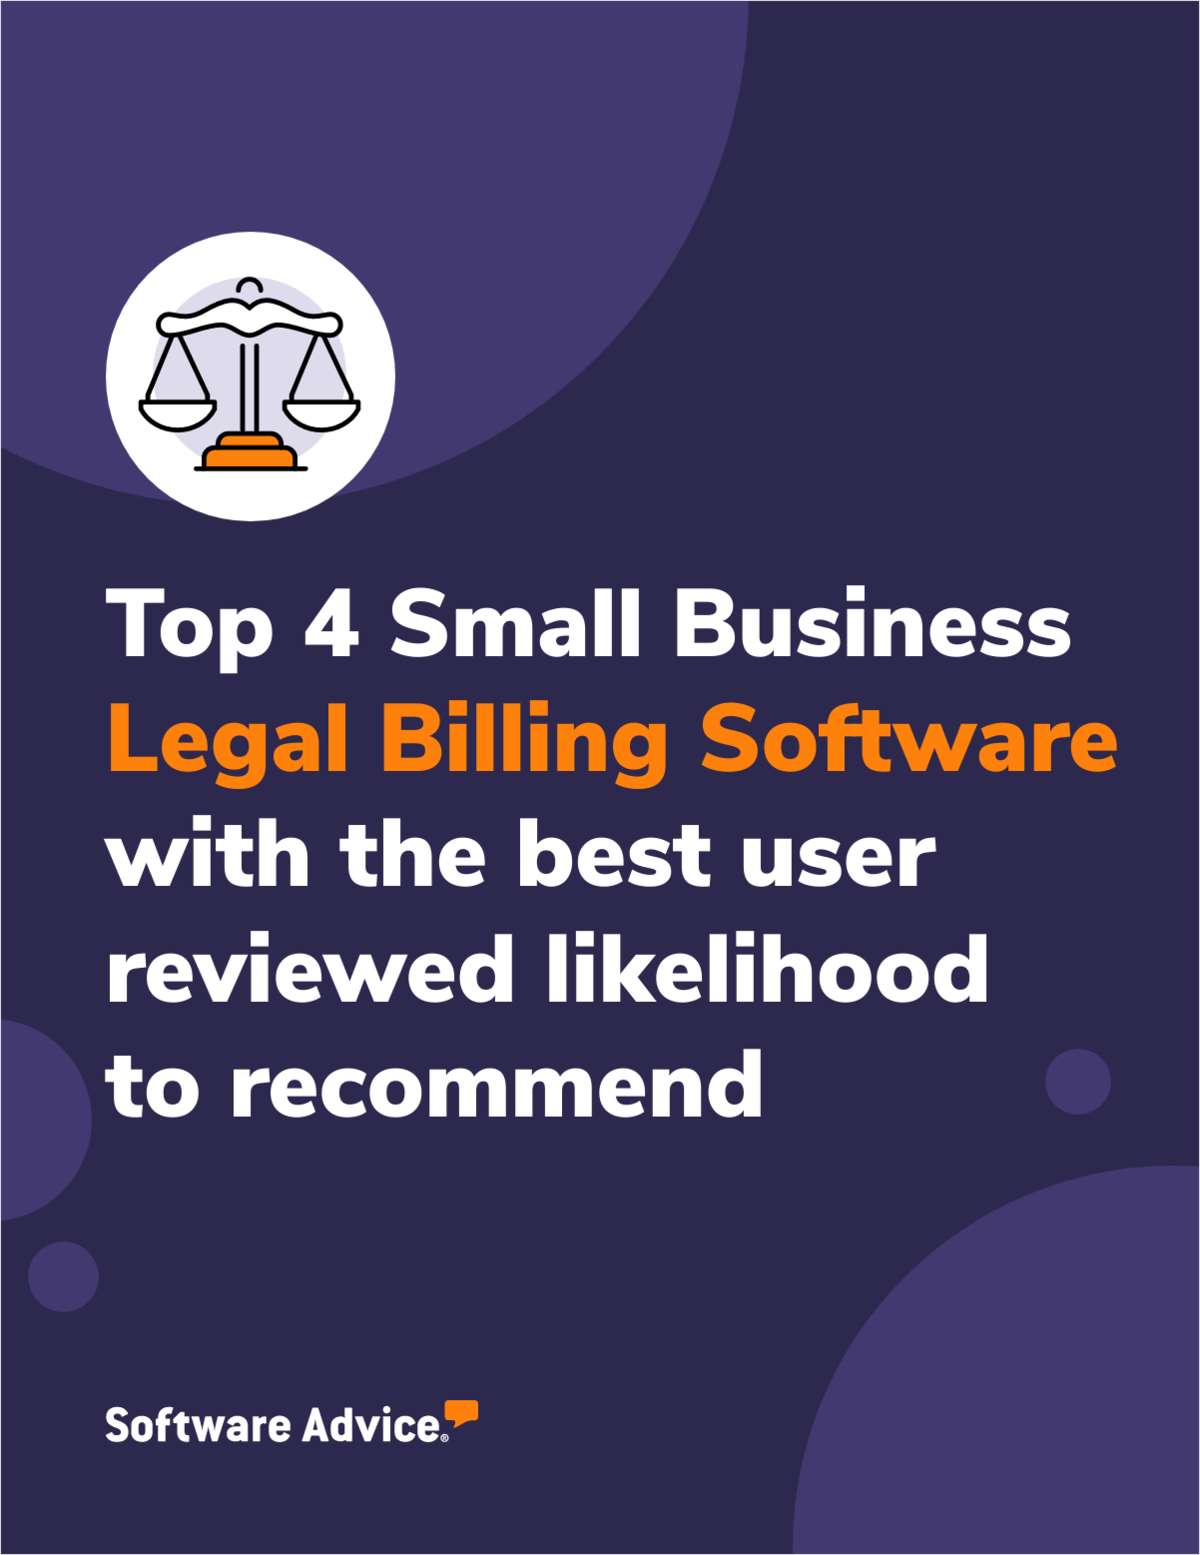 Top 4 Small Business Legal Billing Software With the Best User Reviewed Likelihood to Recommend